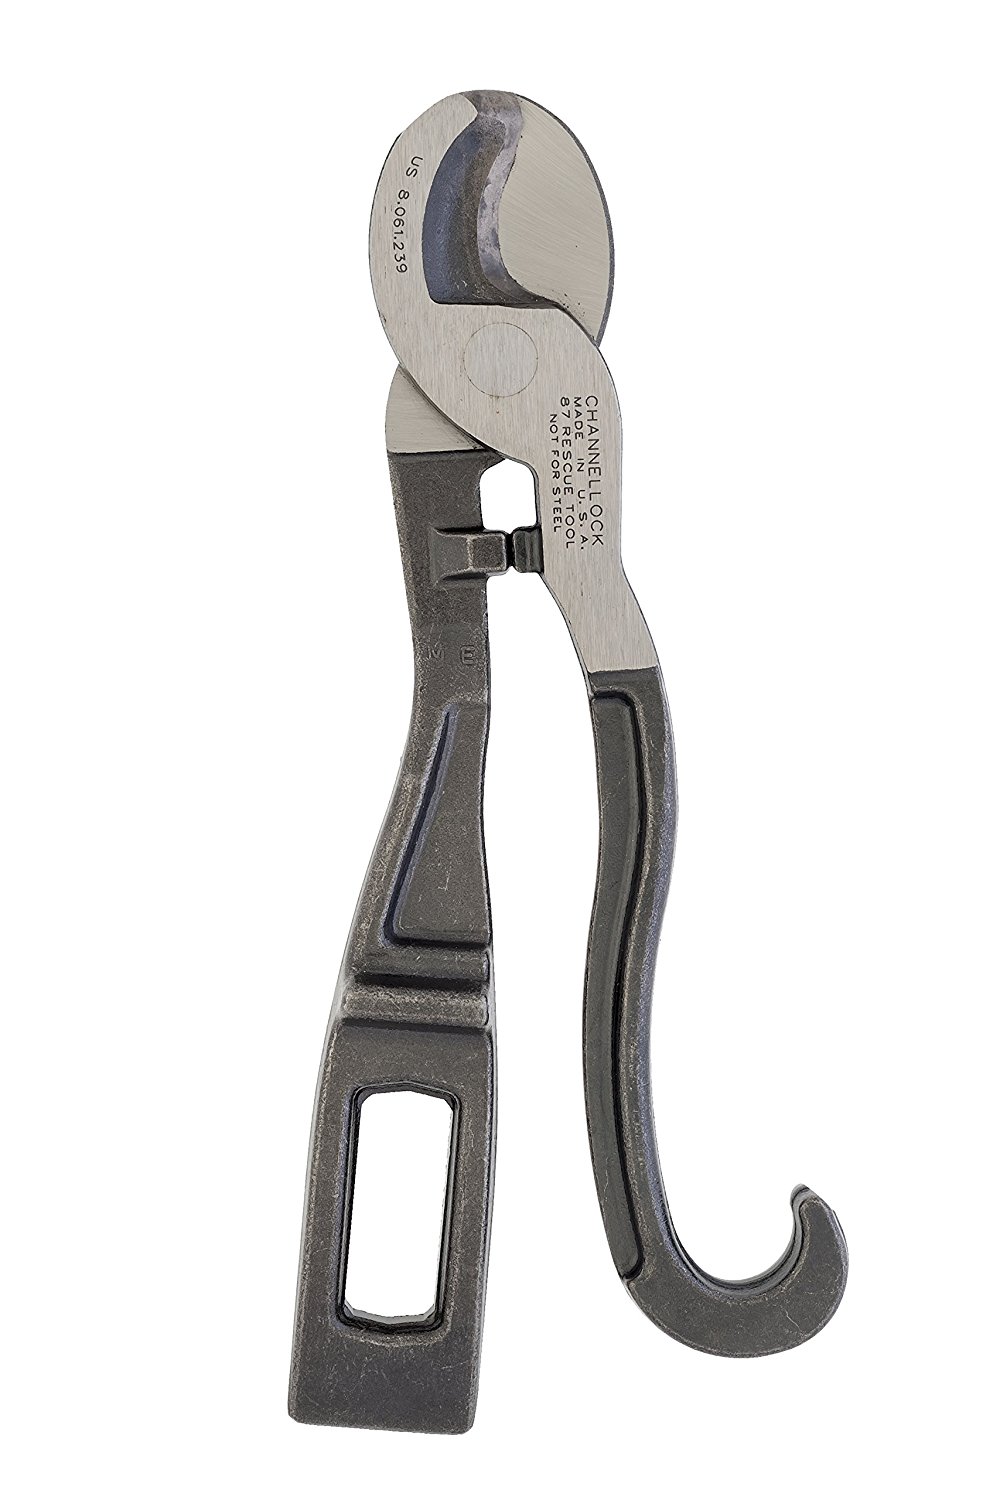 channellock_87_rescue_tool_upright